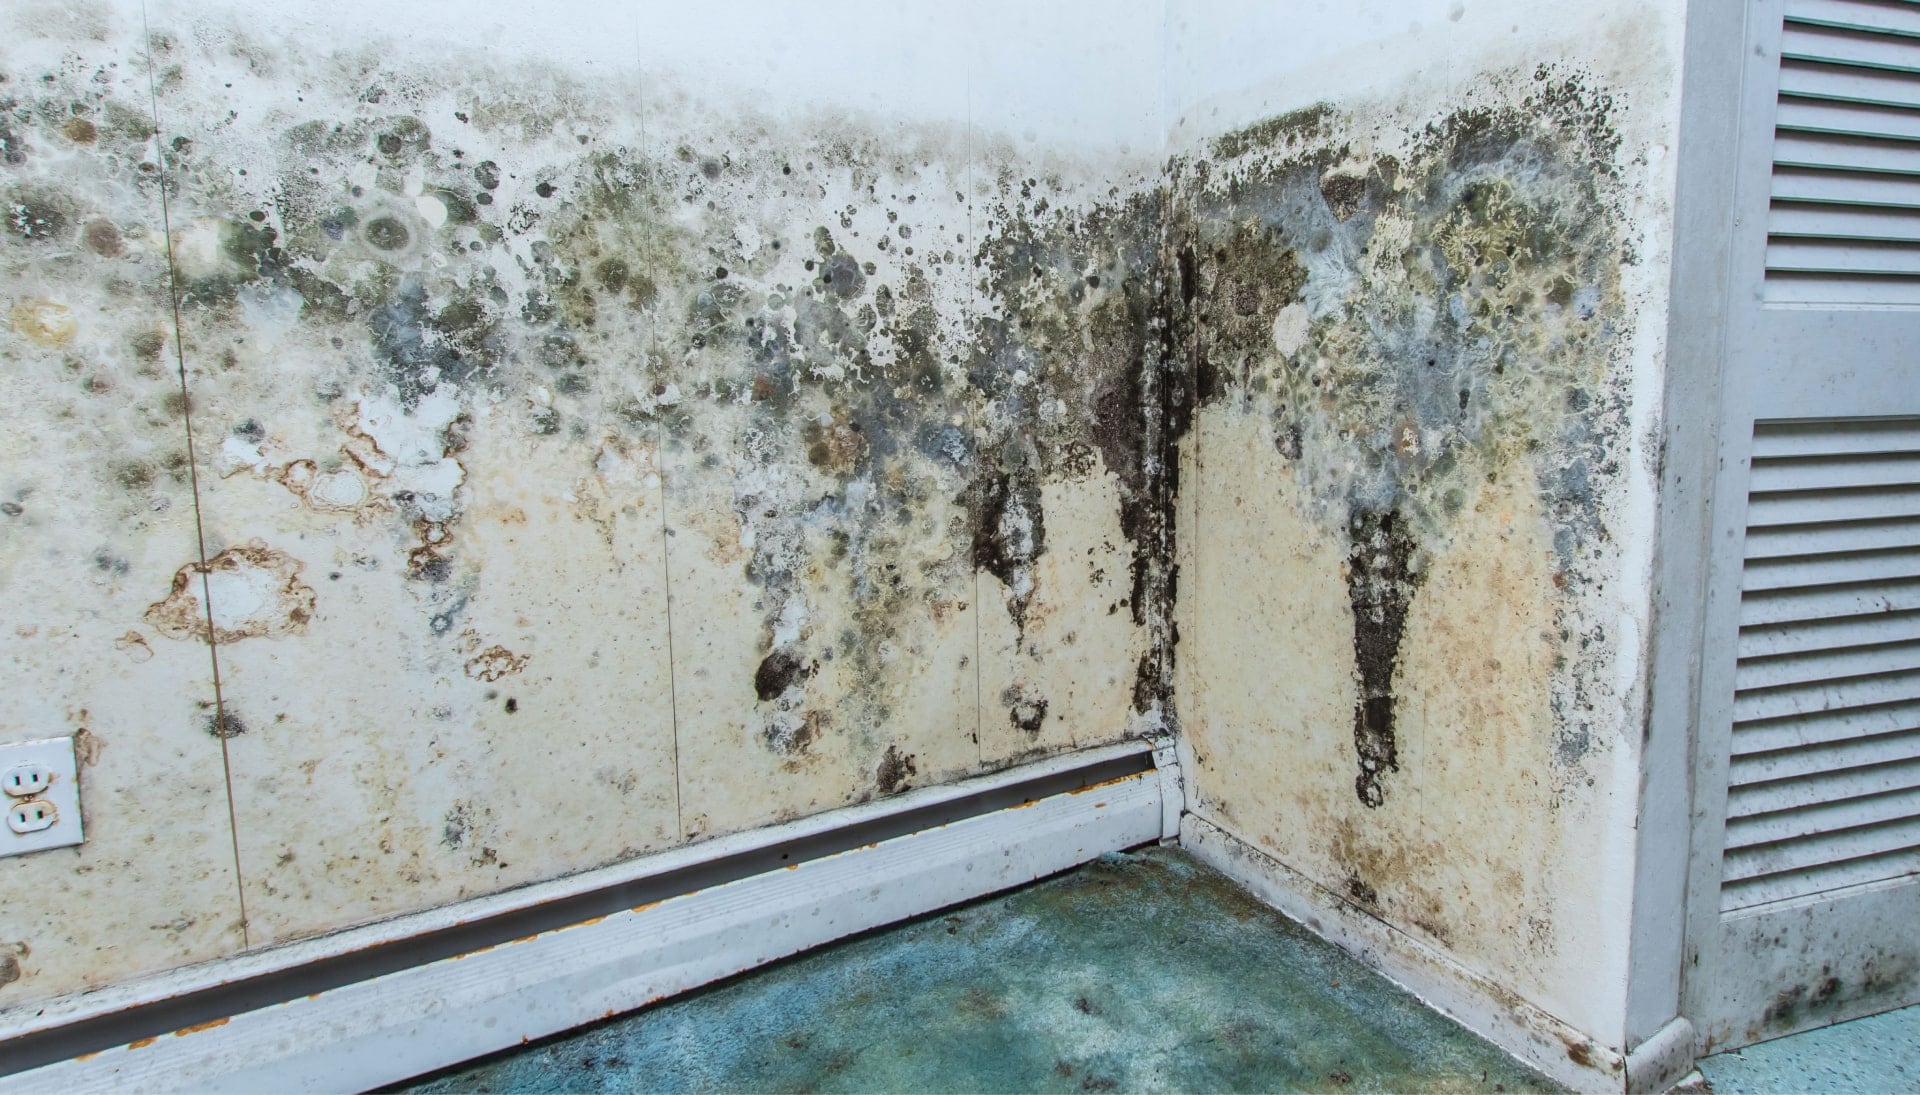 A mold remediation team using specialized techniques to remove mold damage and control odors in a Rochester property, with a focus on safety and efficiency